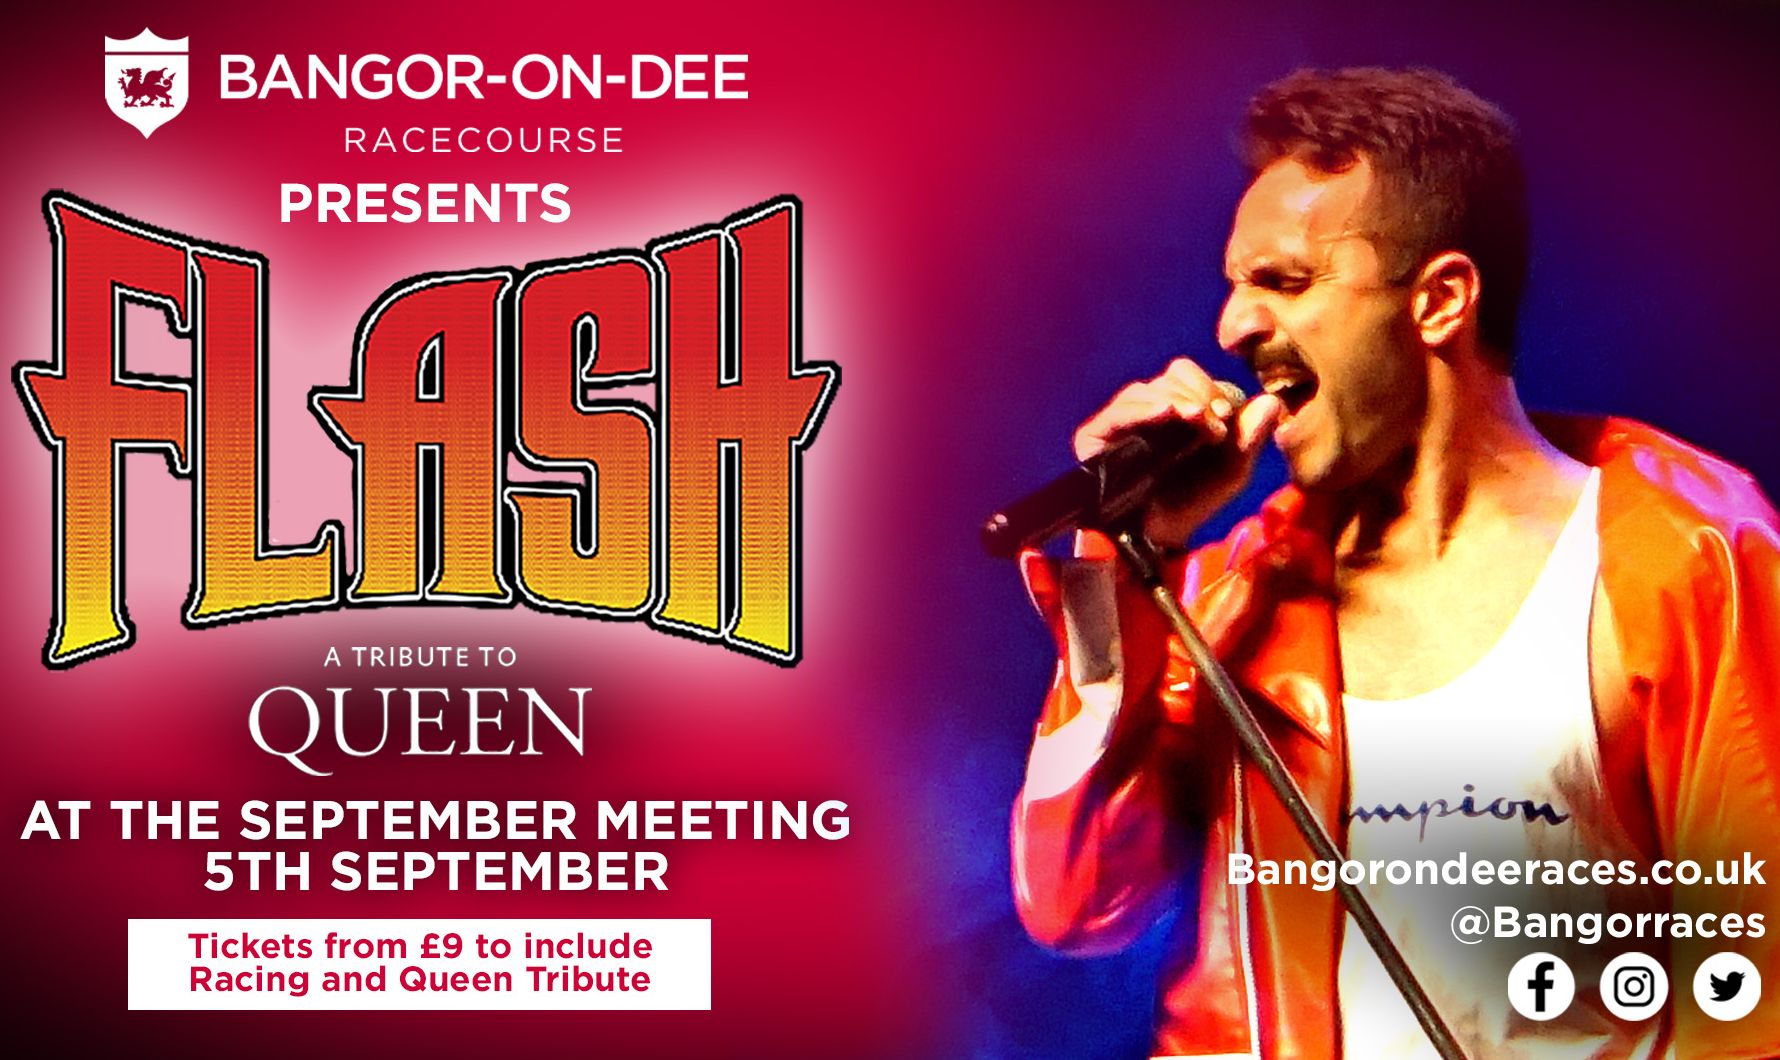 Bangor-on-Dee gets set to rock you with addition of Queen tribute act at the September Meeting thumbnail image